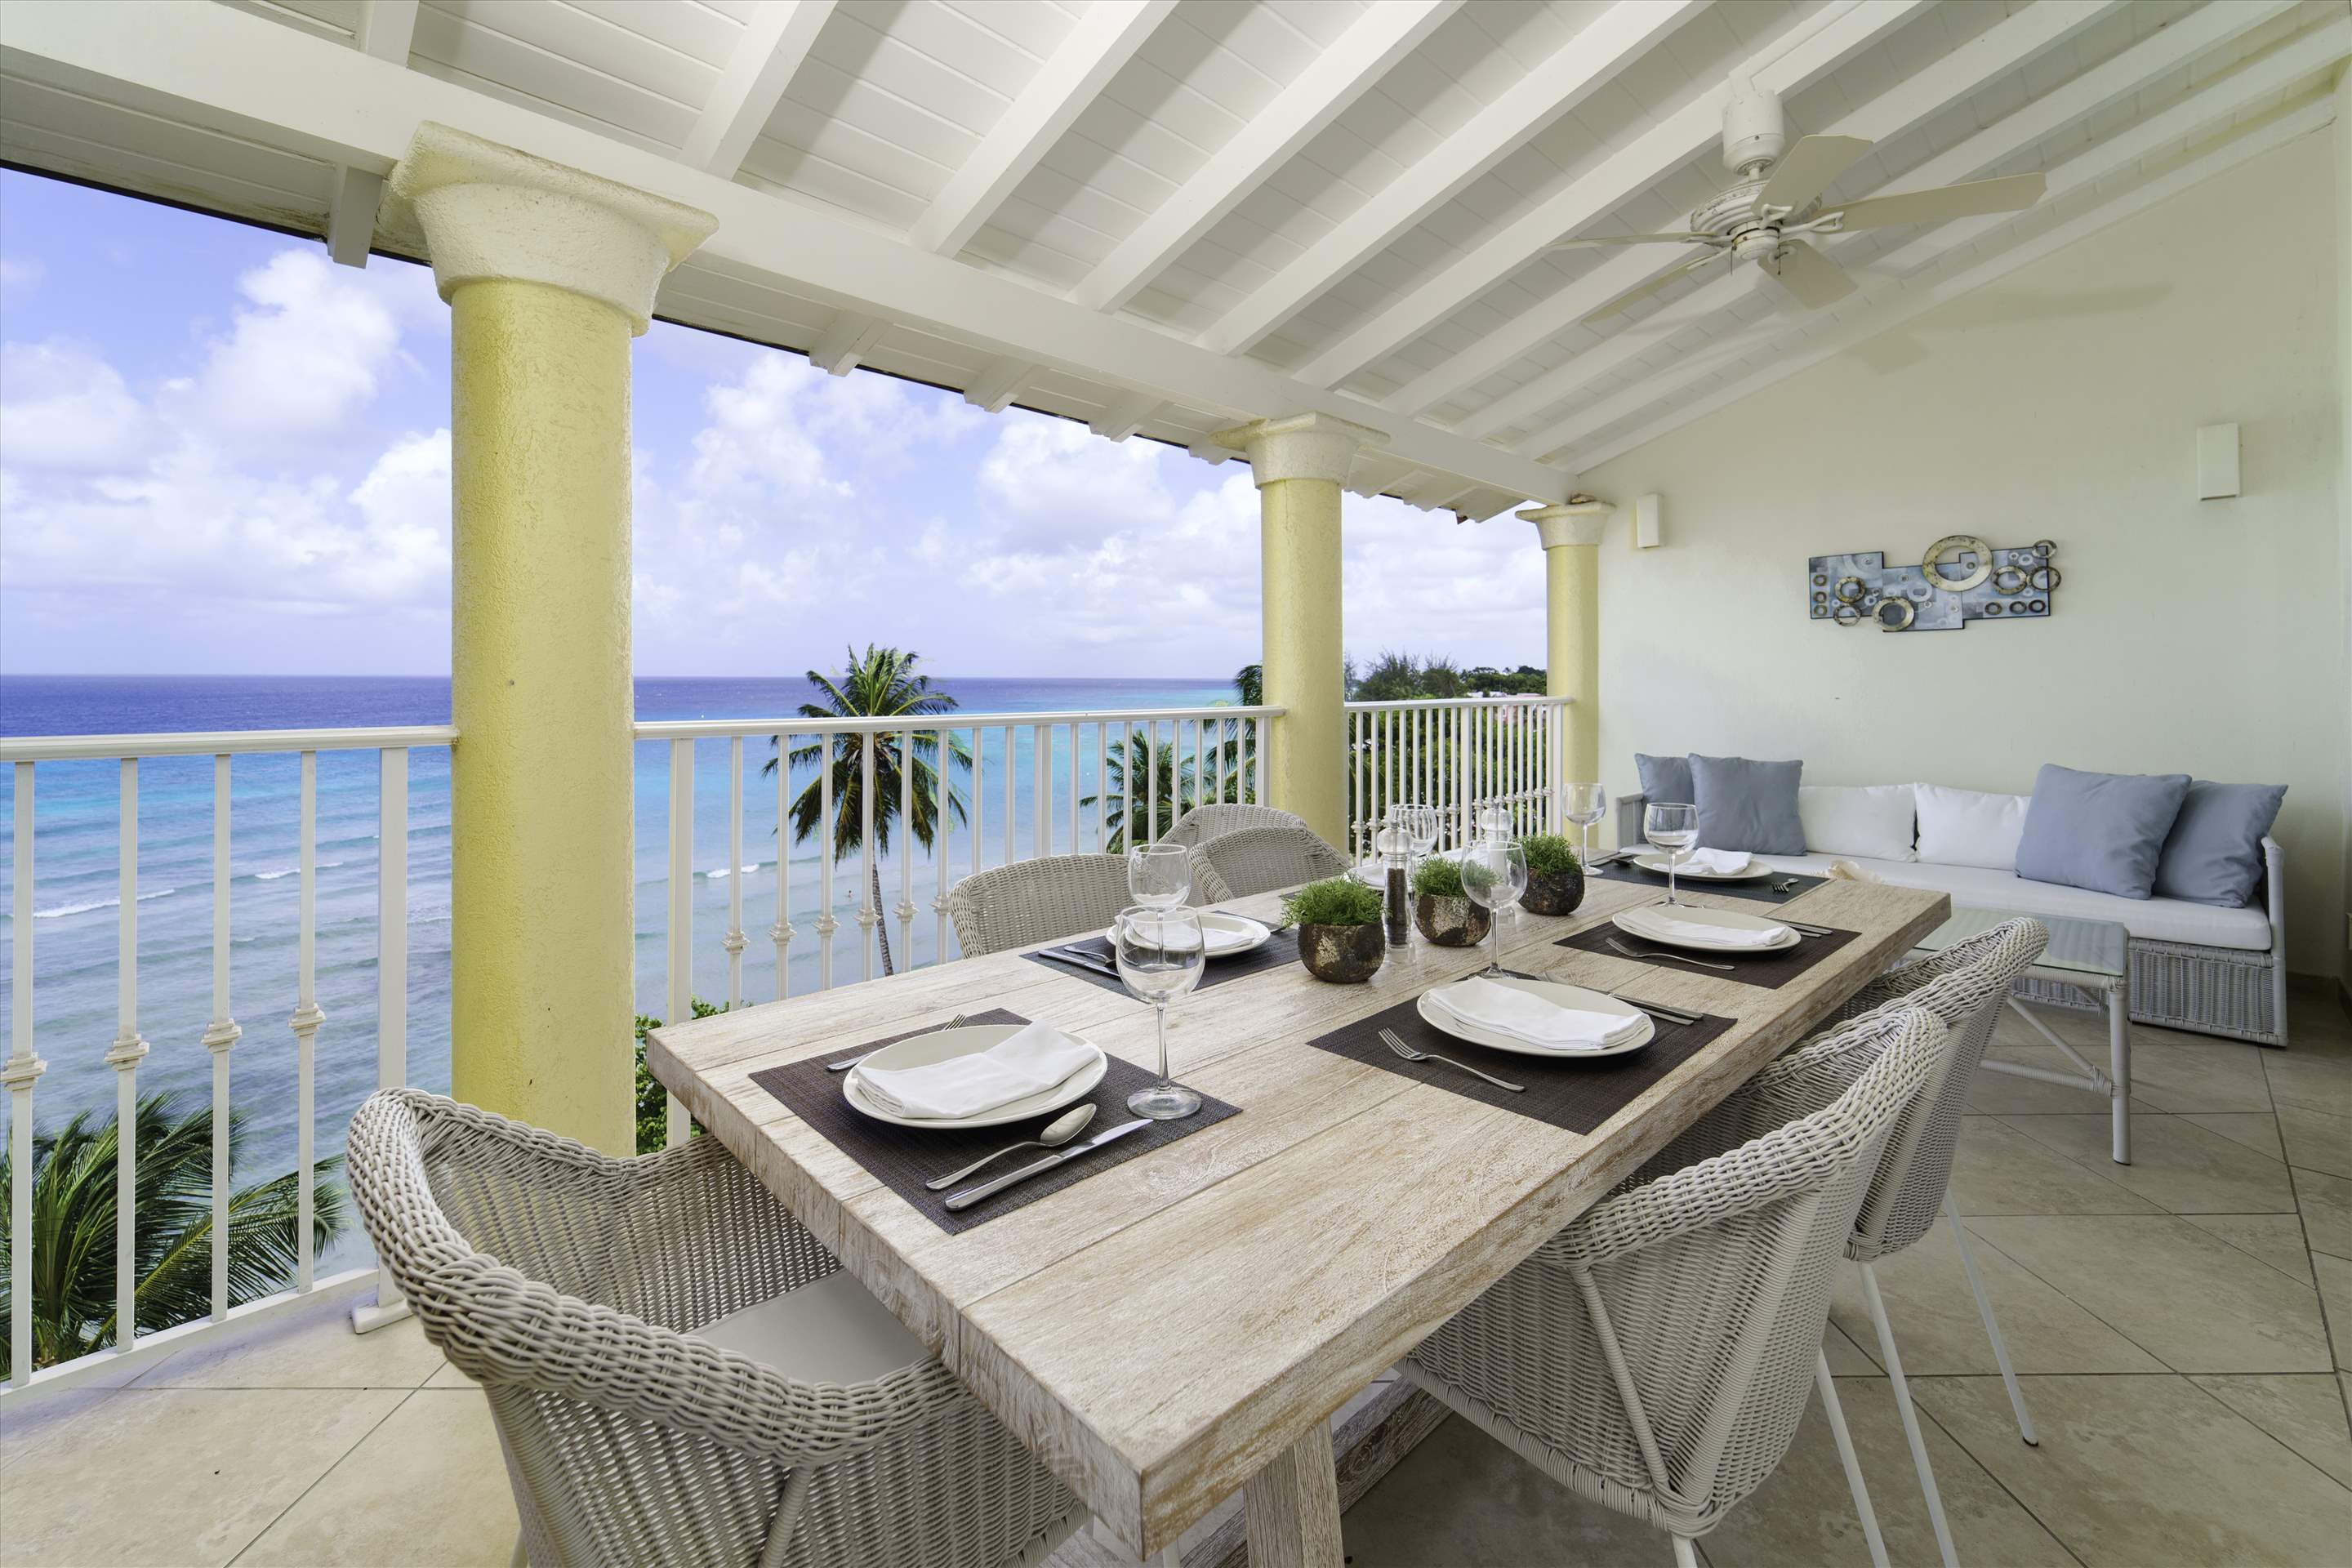 Sapphire Beach 517, 2 bedroom, 3 bedroom apartment in St. Lawrence Gap & South Coast, Barbados Photo #1